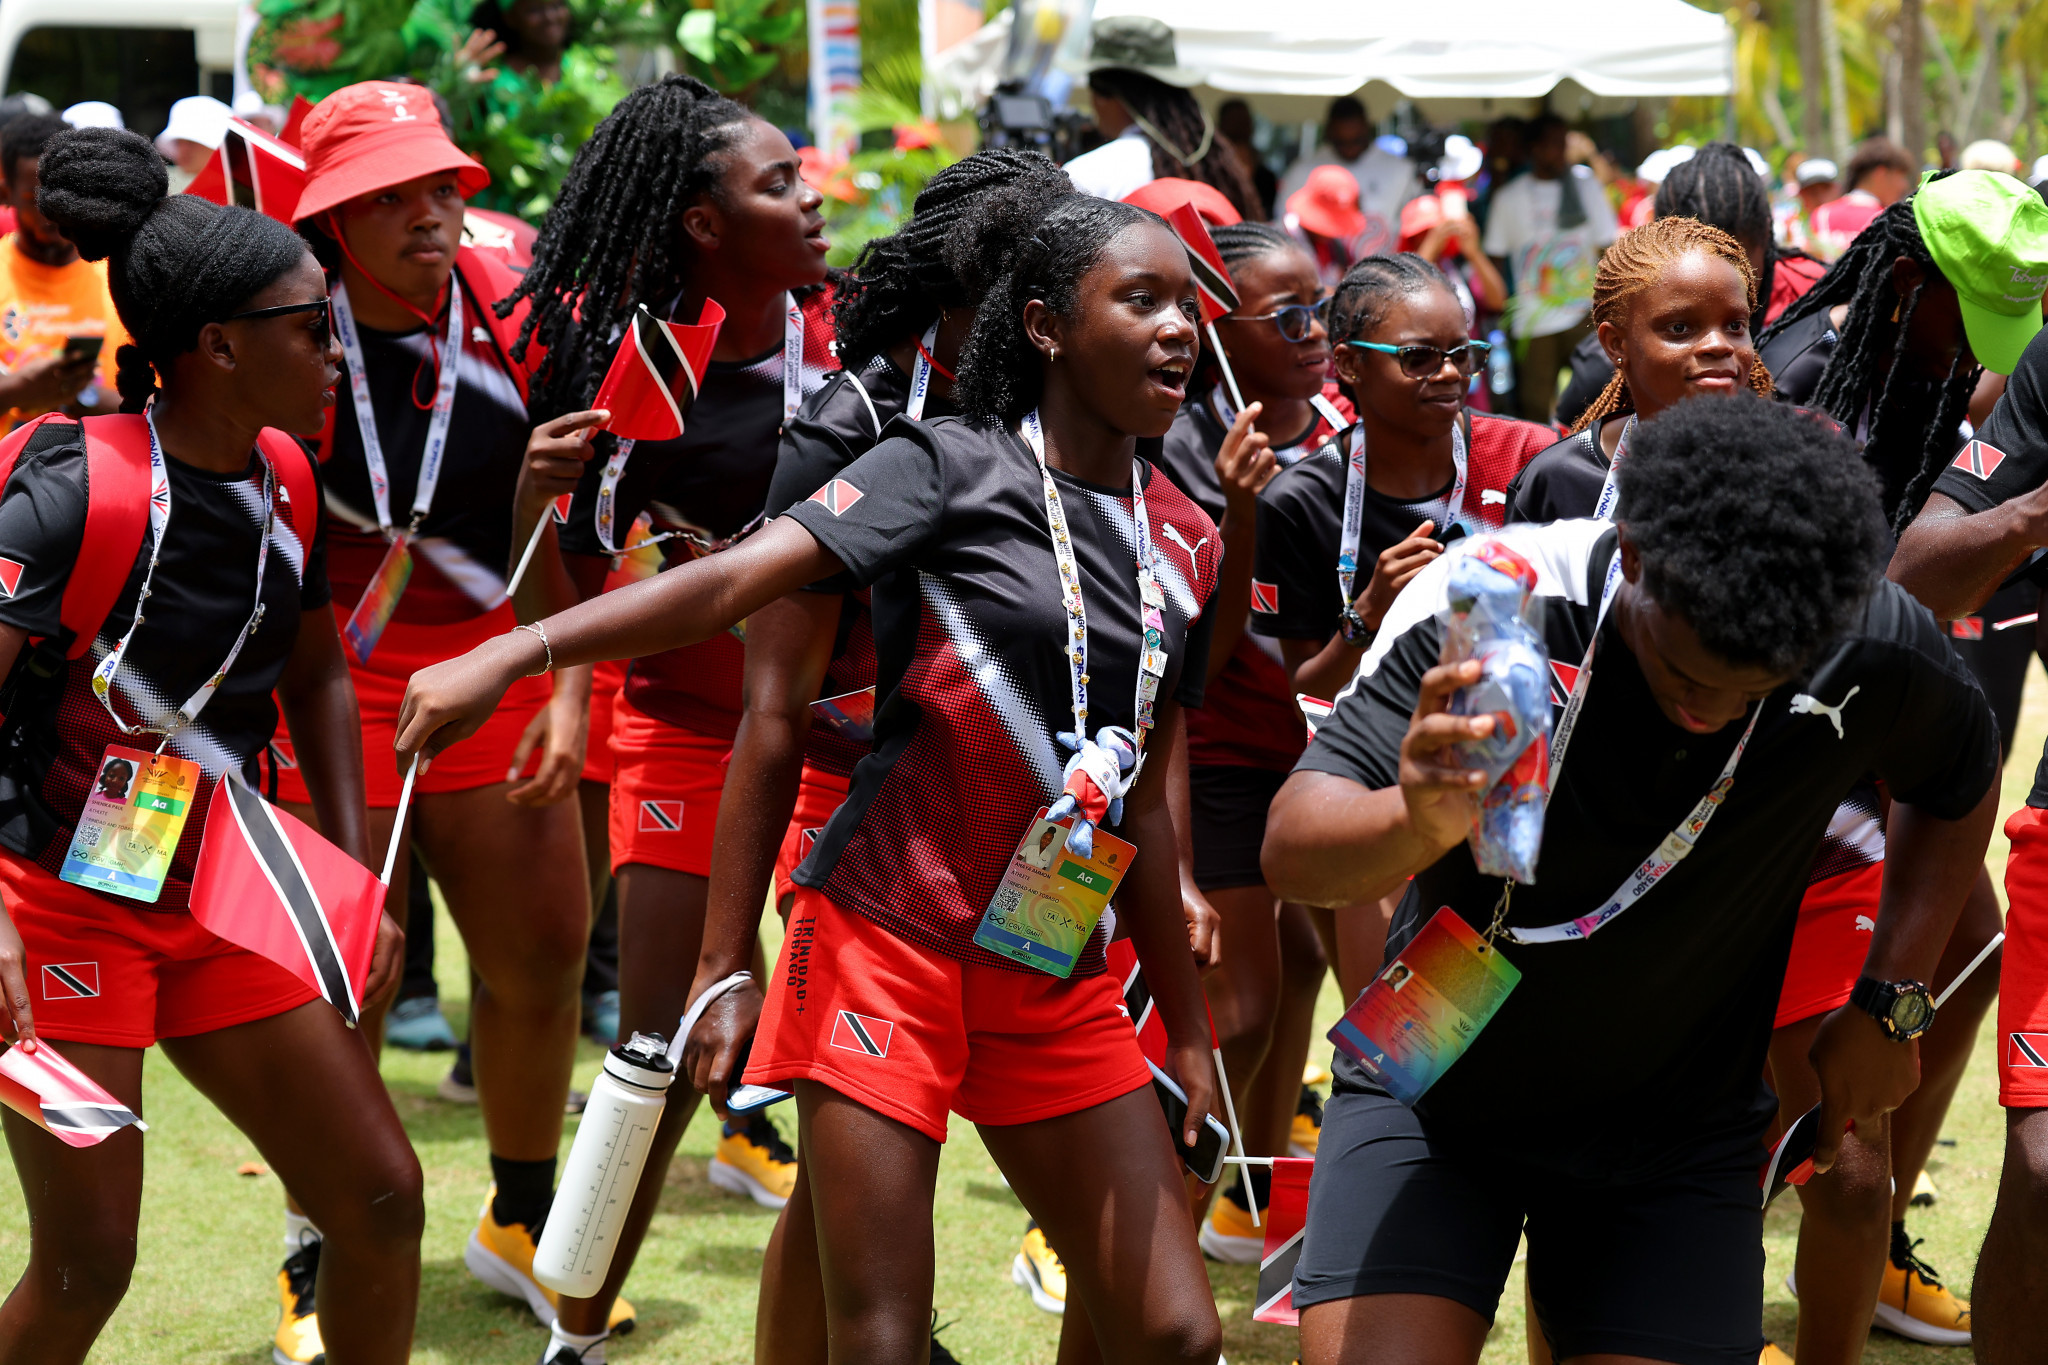 Trinidad and Tobago has been praised for having "achieved everything" by Dame Louise Martin at the Commonwealth Youth Games ©Getty Images